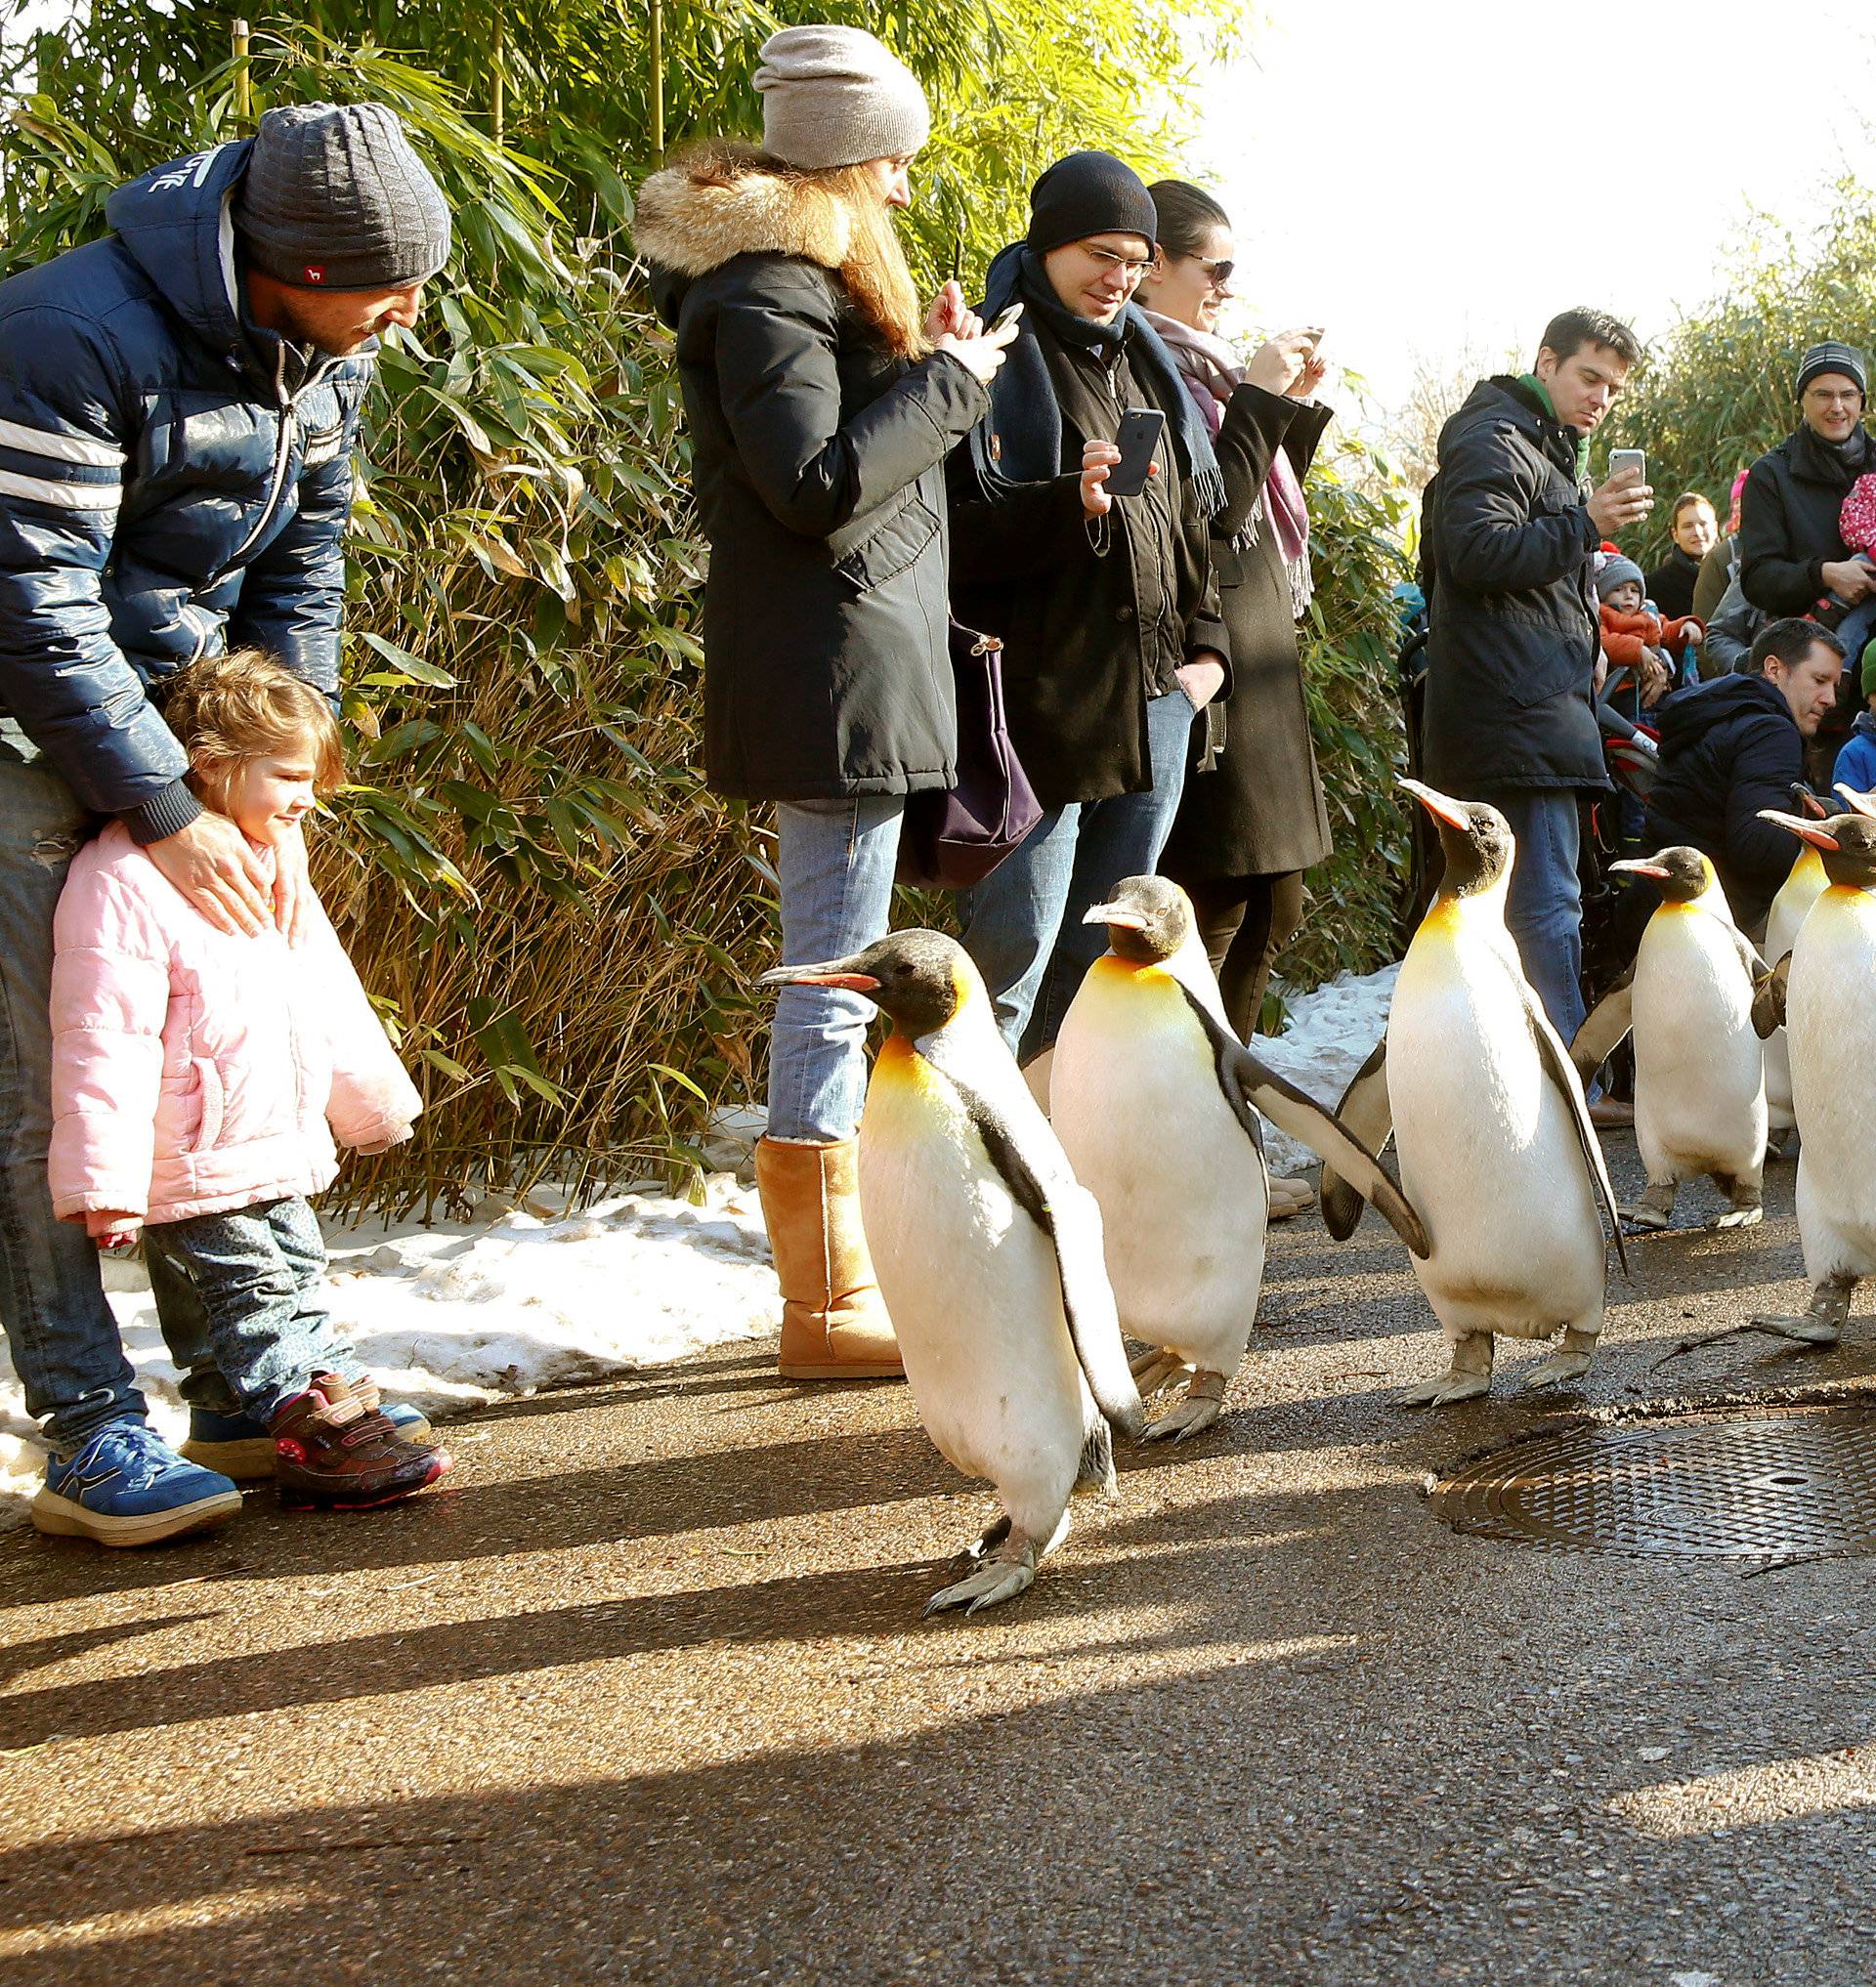 People follow king penguins exploring their outdoor pen at Zurich's Zoo